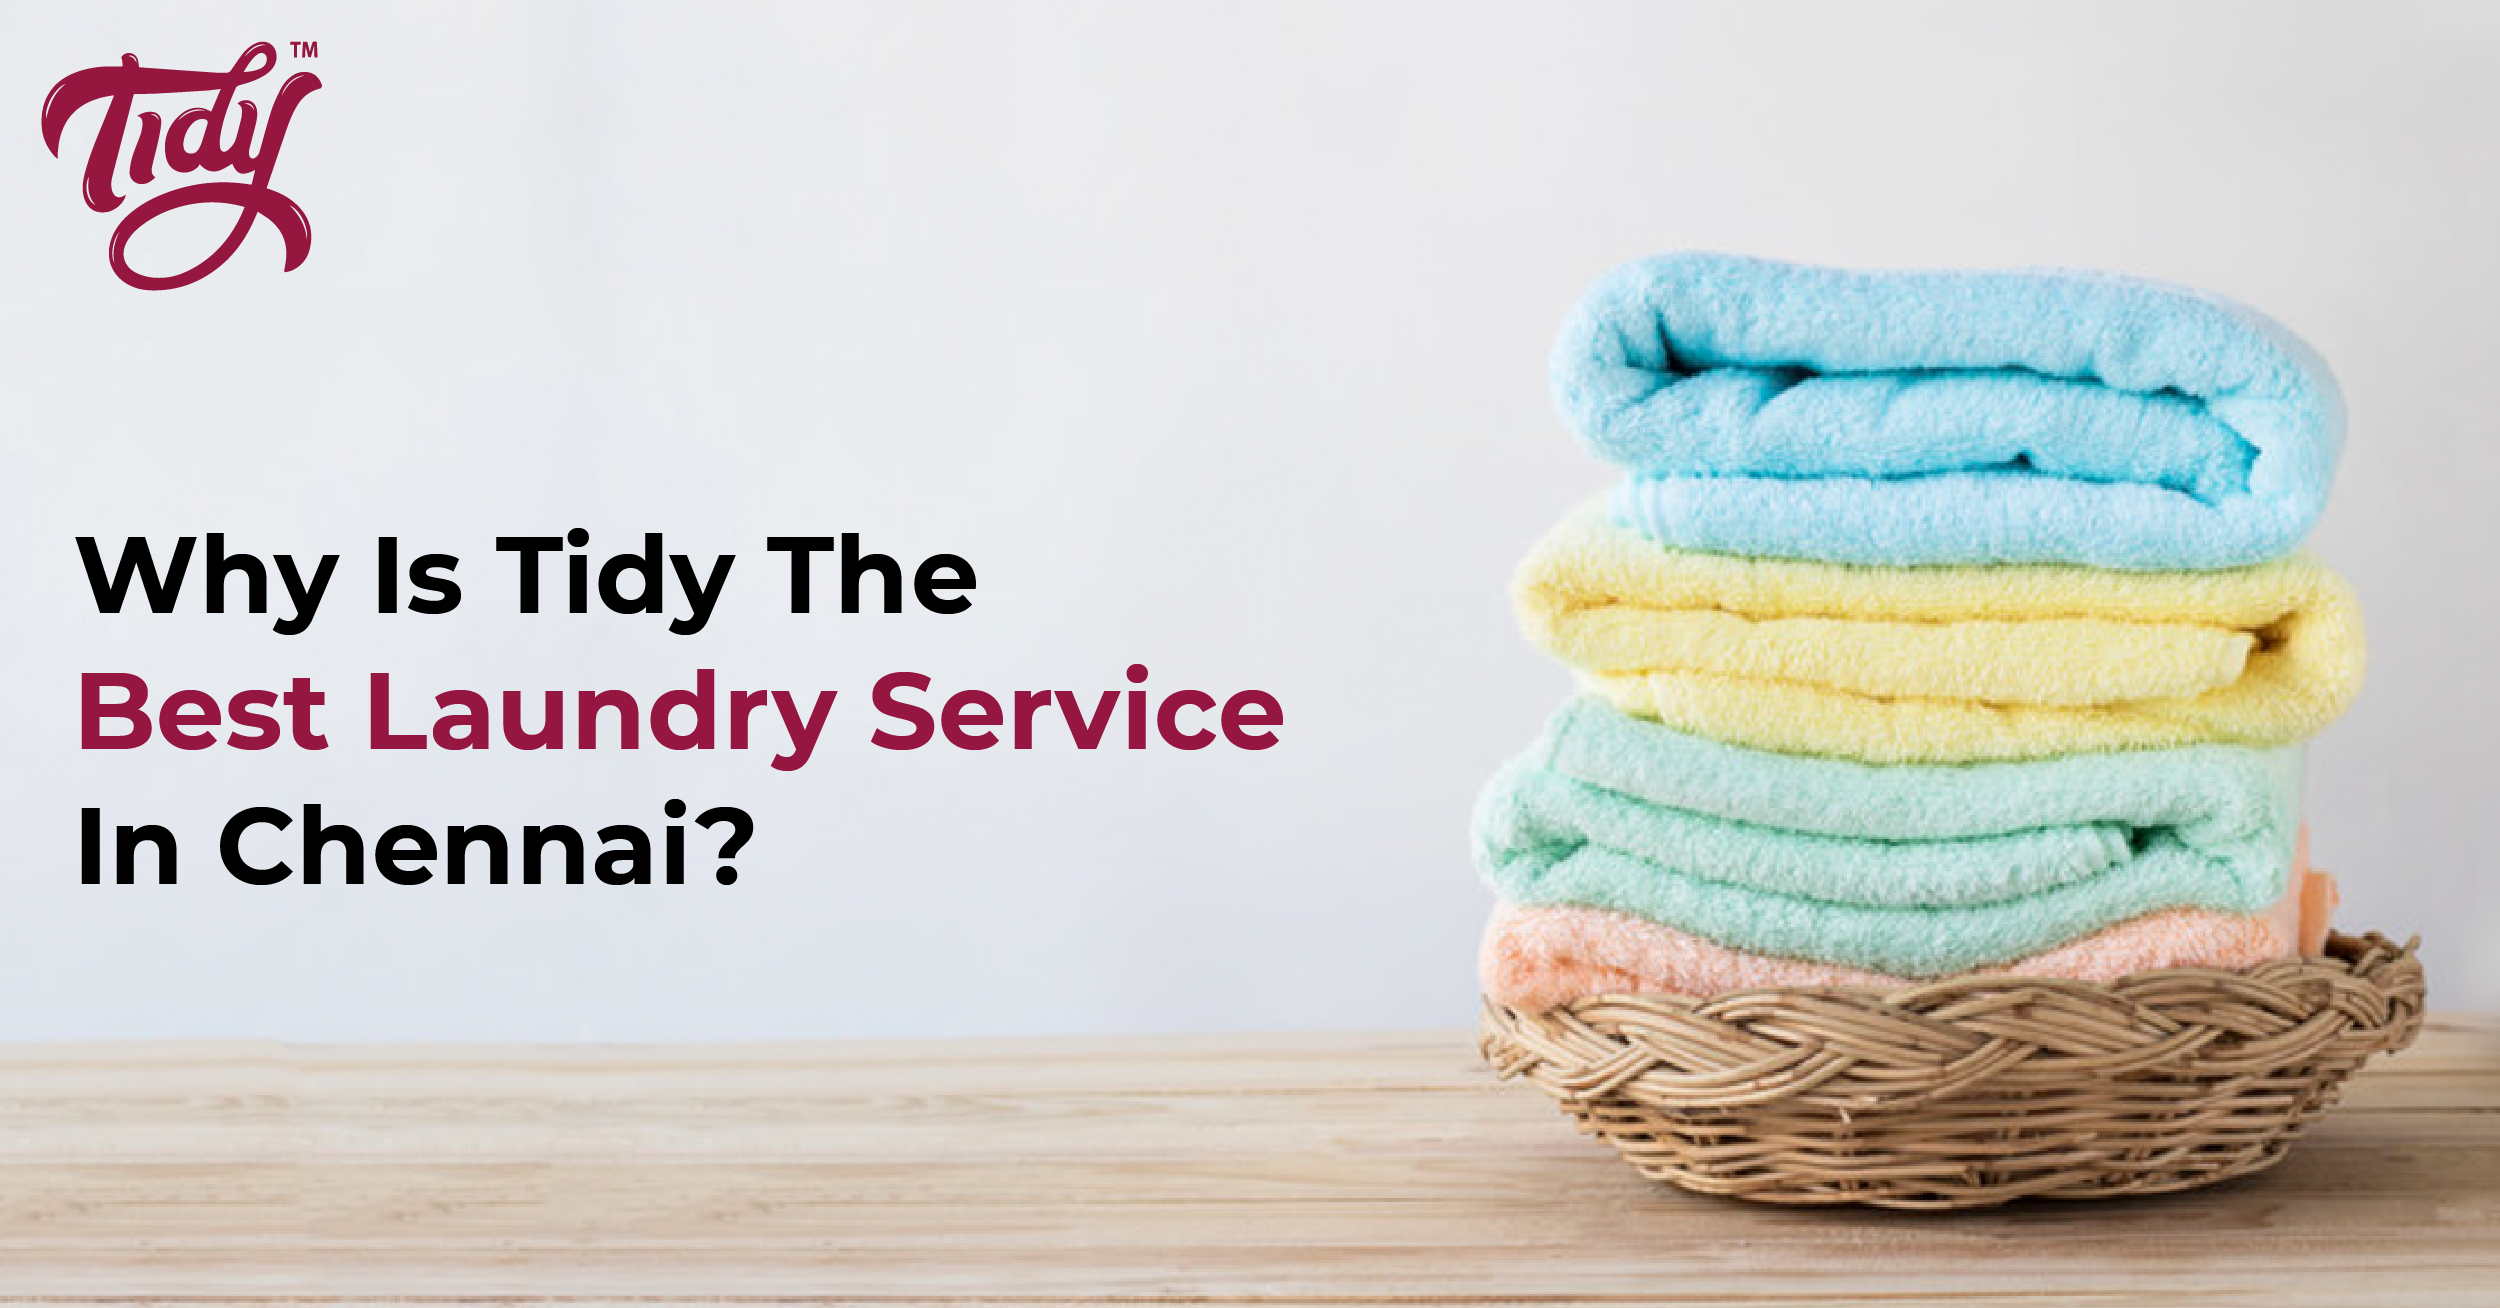 Best Laundry Service In Chennai